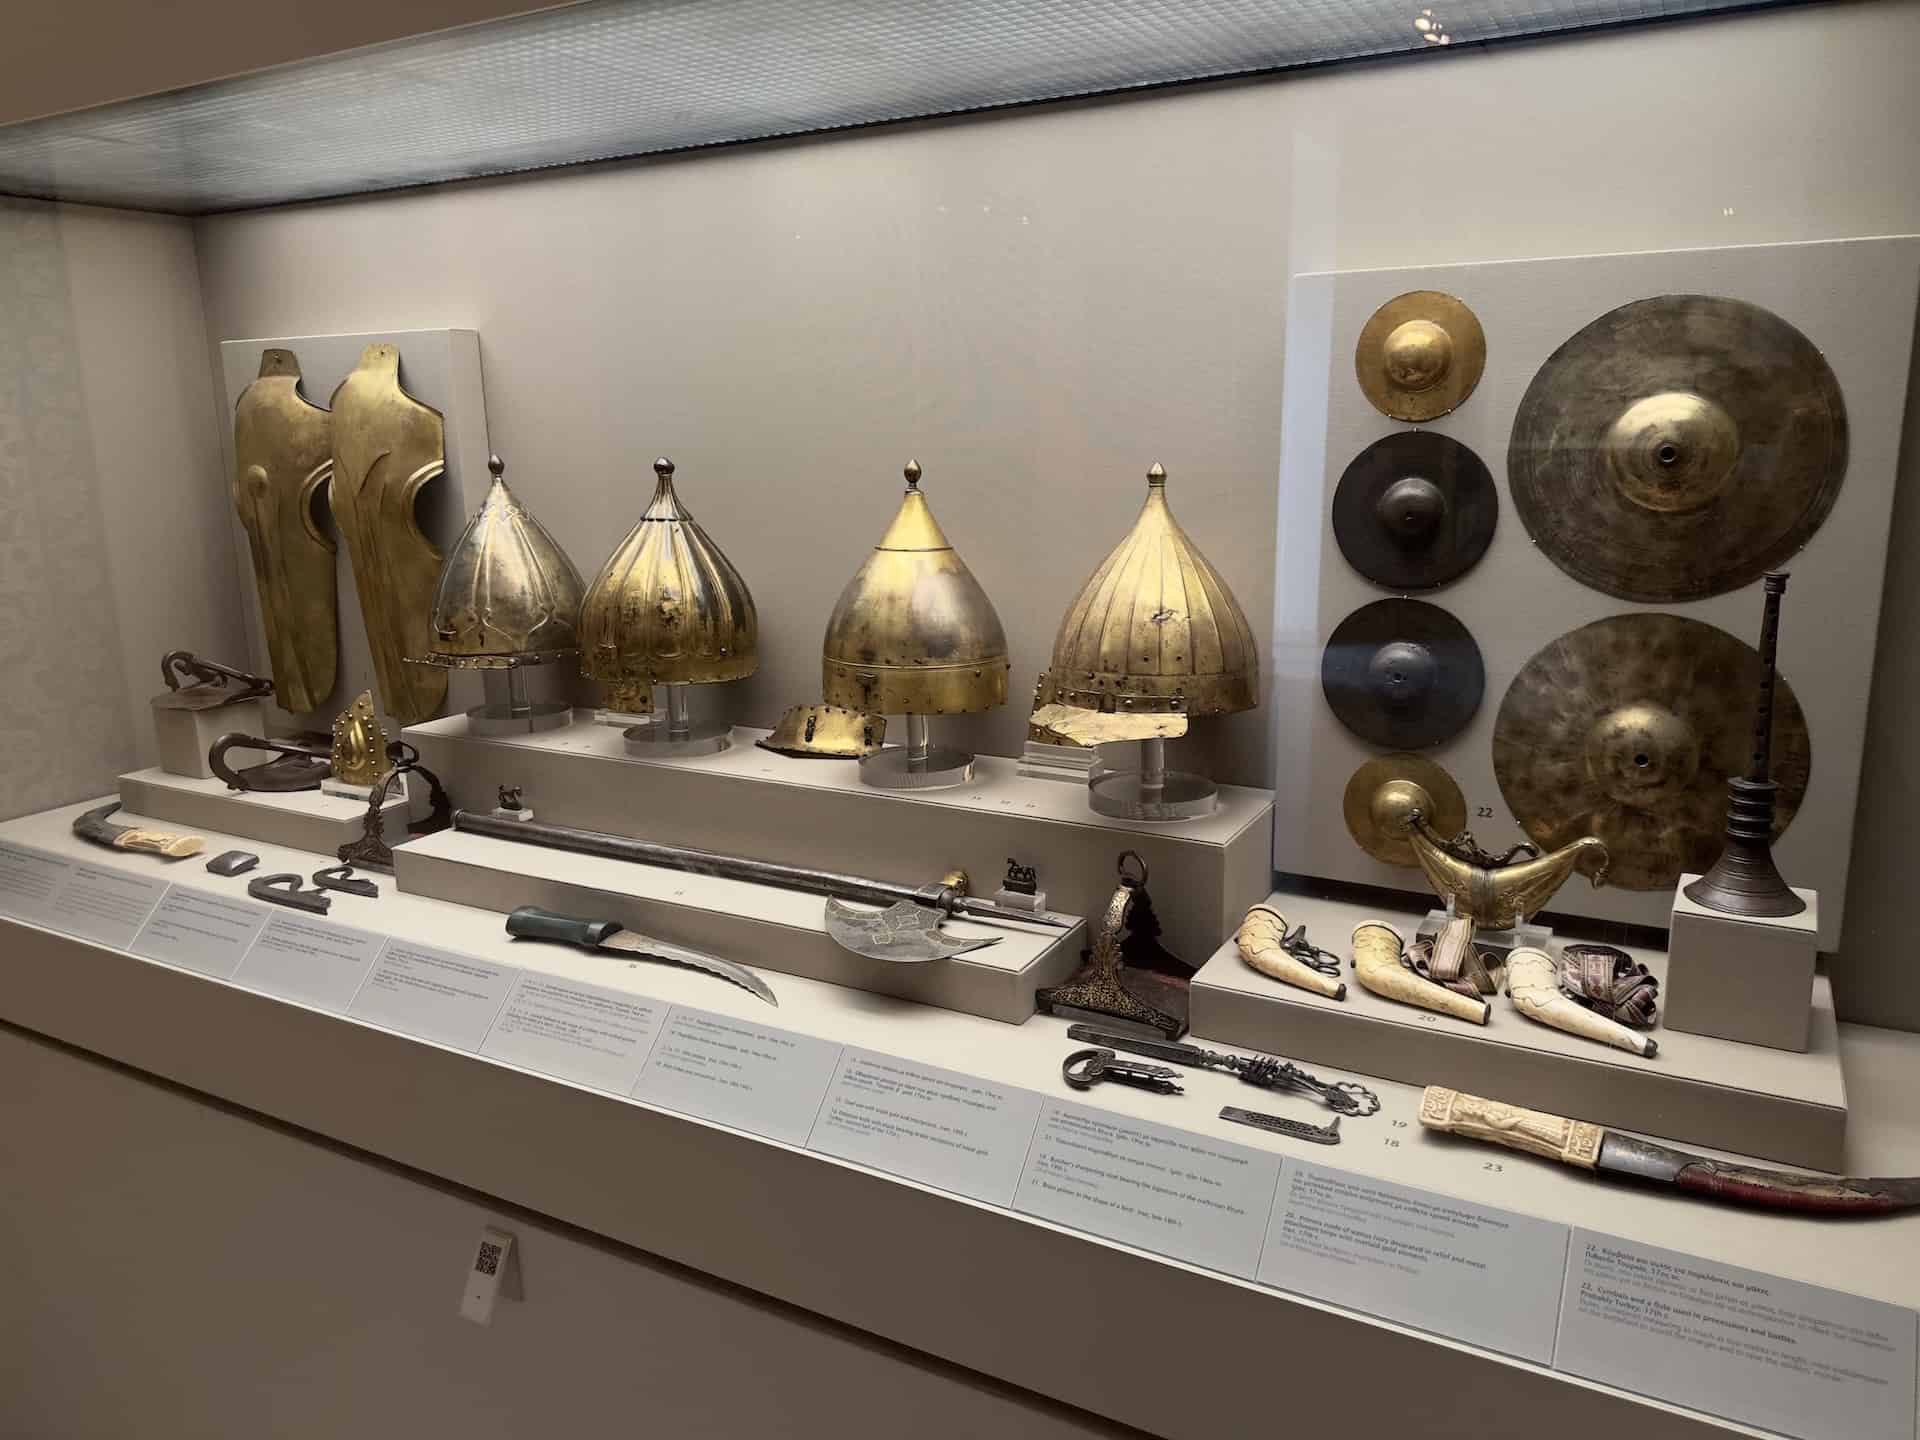 Military parade and battle equipment from Turkey and Iran; 16th-19th century at the Benaki Museum of Islamic Art in Athens, Greece